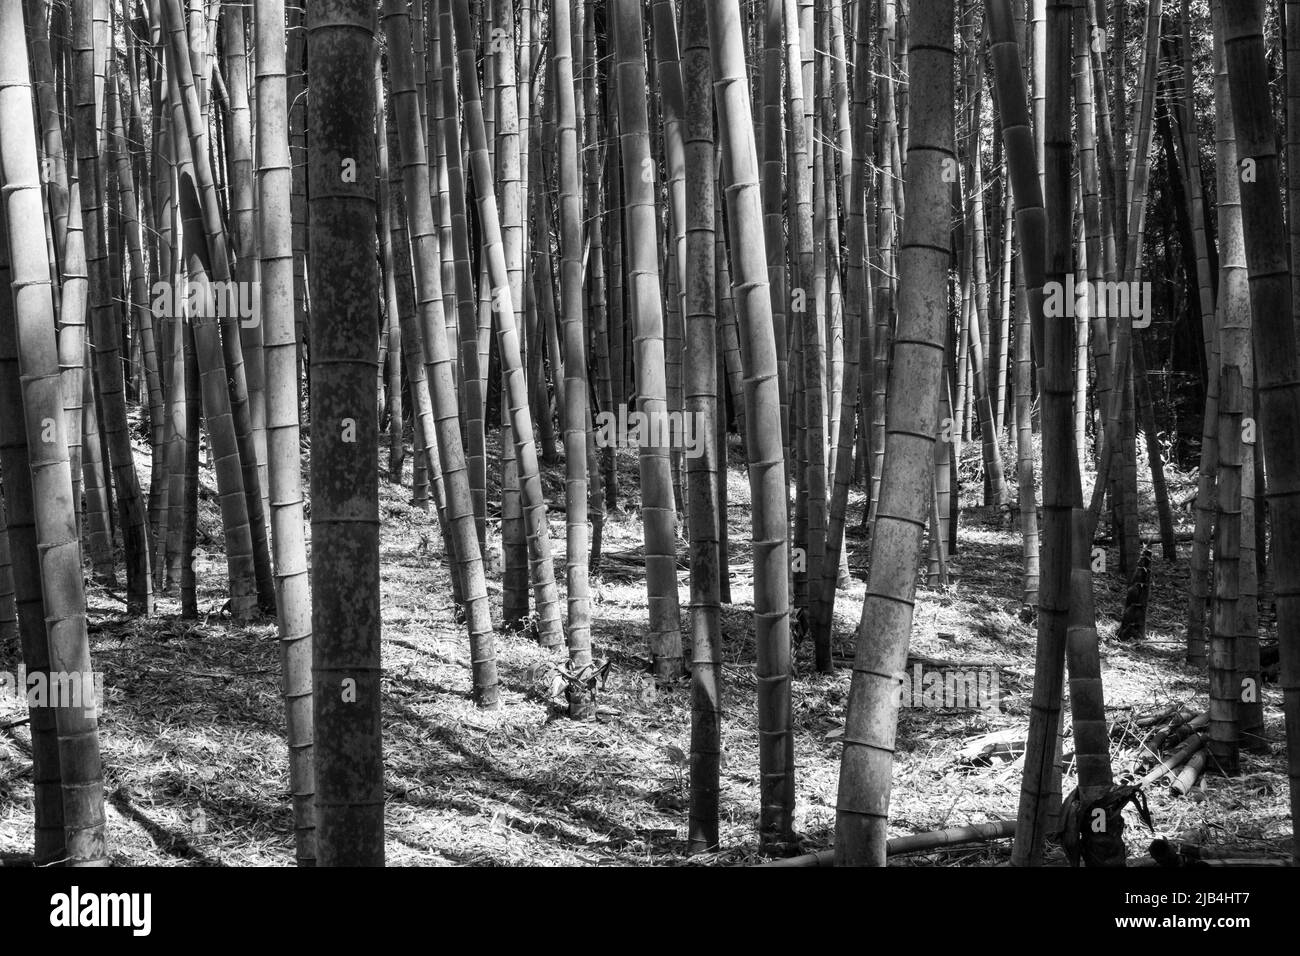 Conceptive image of private bamboo forest in monochrome (black and white) colour. Stock Photo